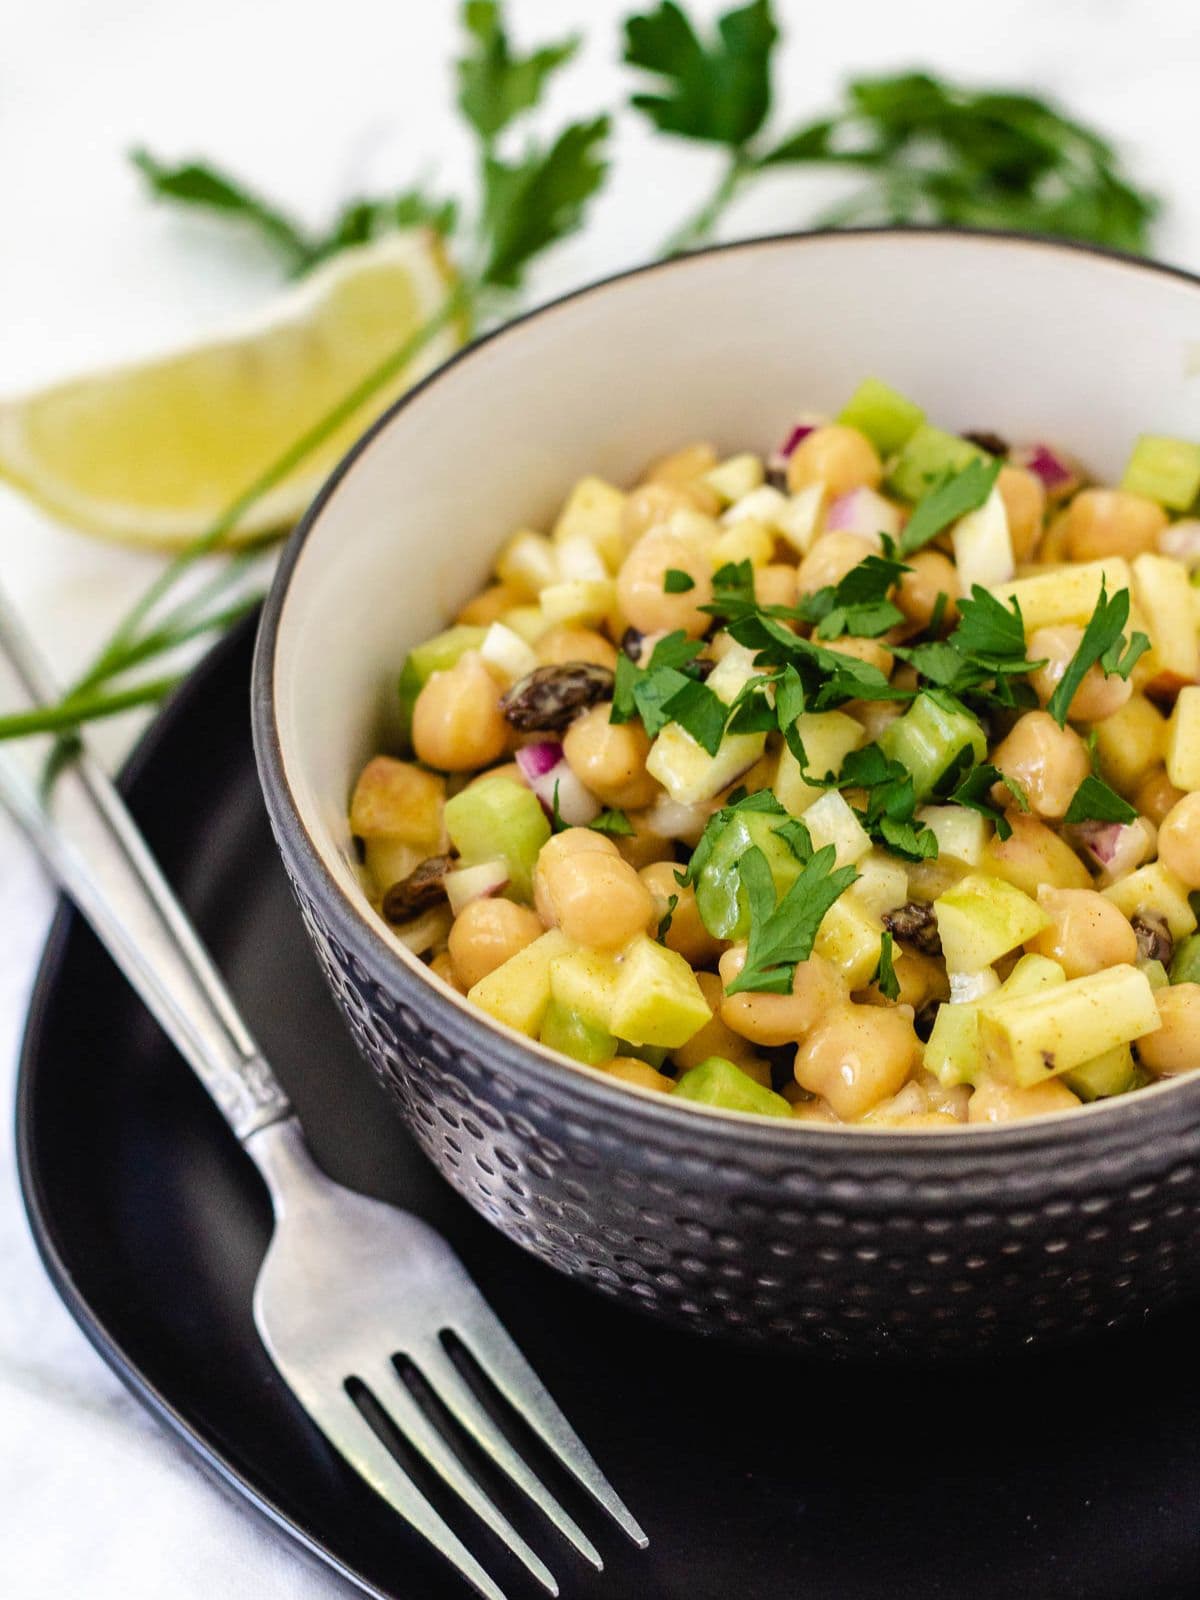 Chickpea curry salad in a black bowl served on a black plate and a silver fork to the side